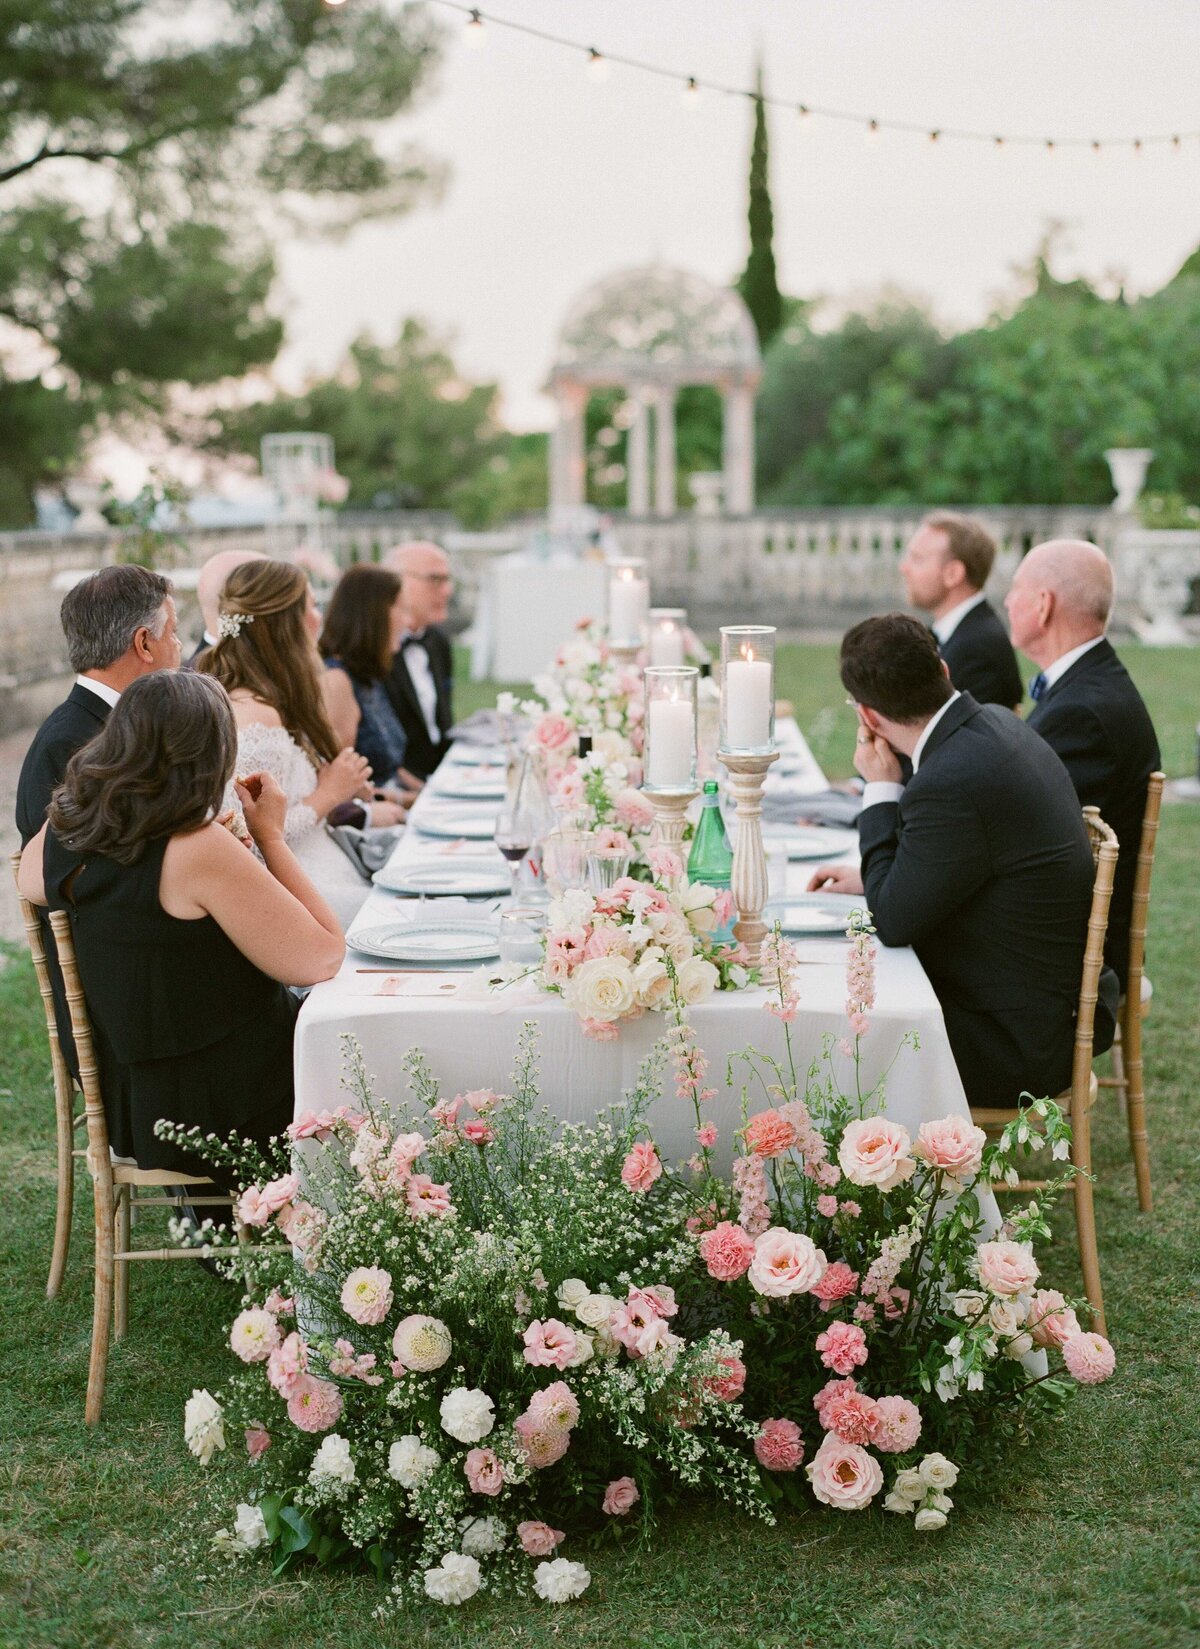 Jennifer Fox Weddings English speaking wedding planning & design agency in France crafting refined and bespoke weddings and celebrations Provence, Paris and destination Alyssa-Aaron-Molly-Carr-Photography-95